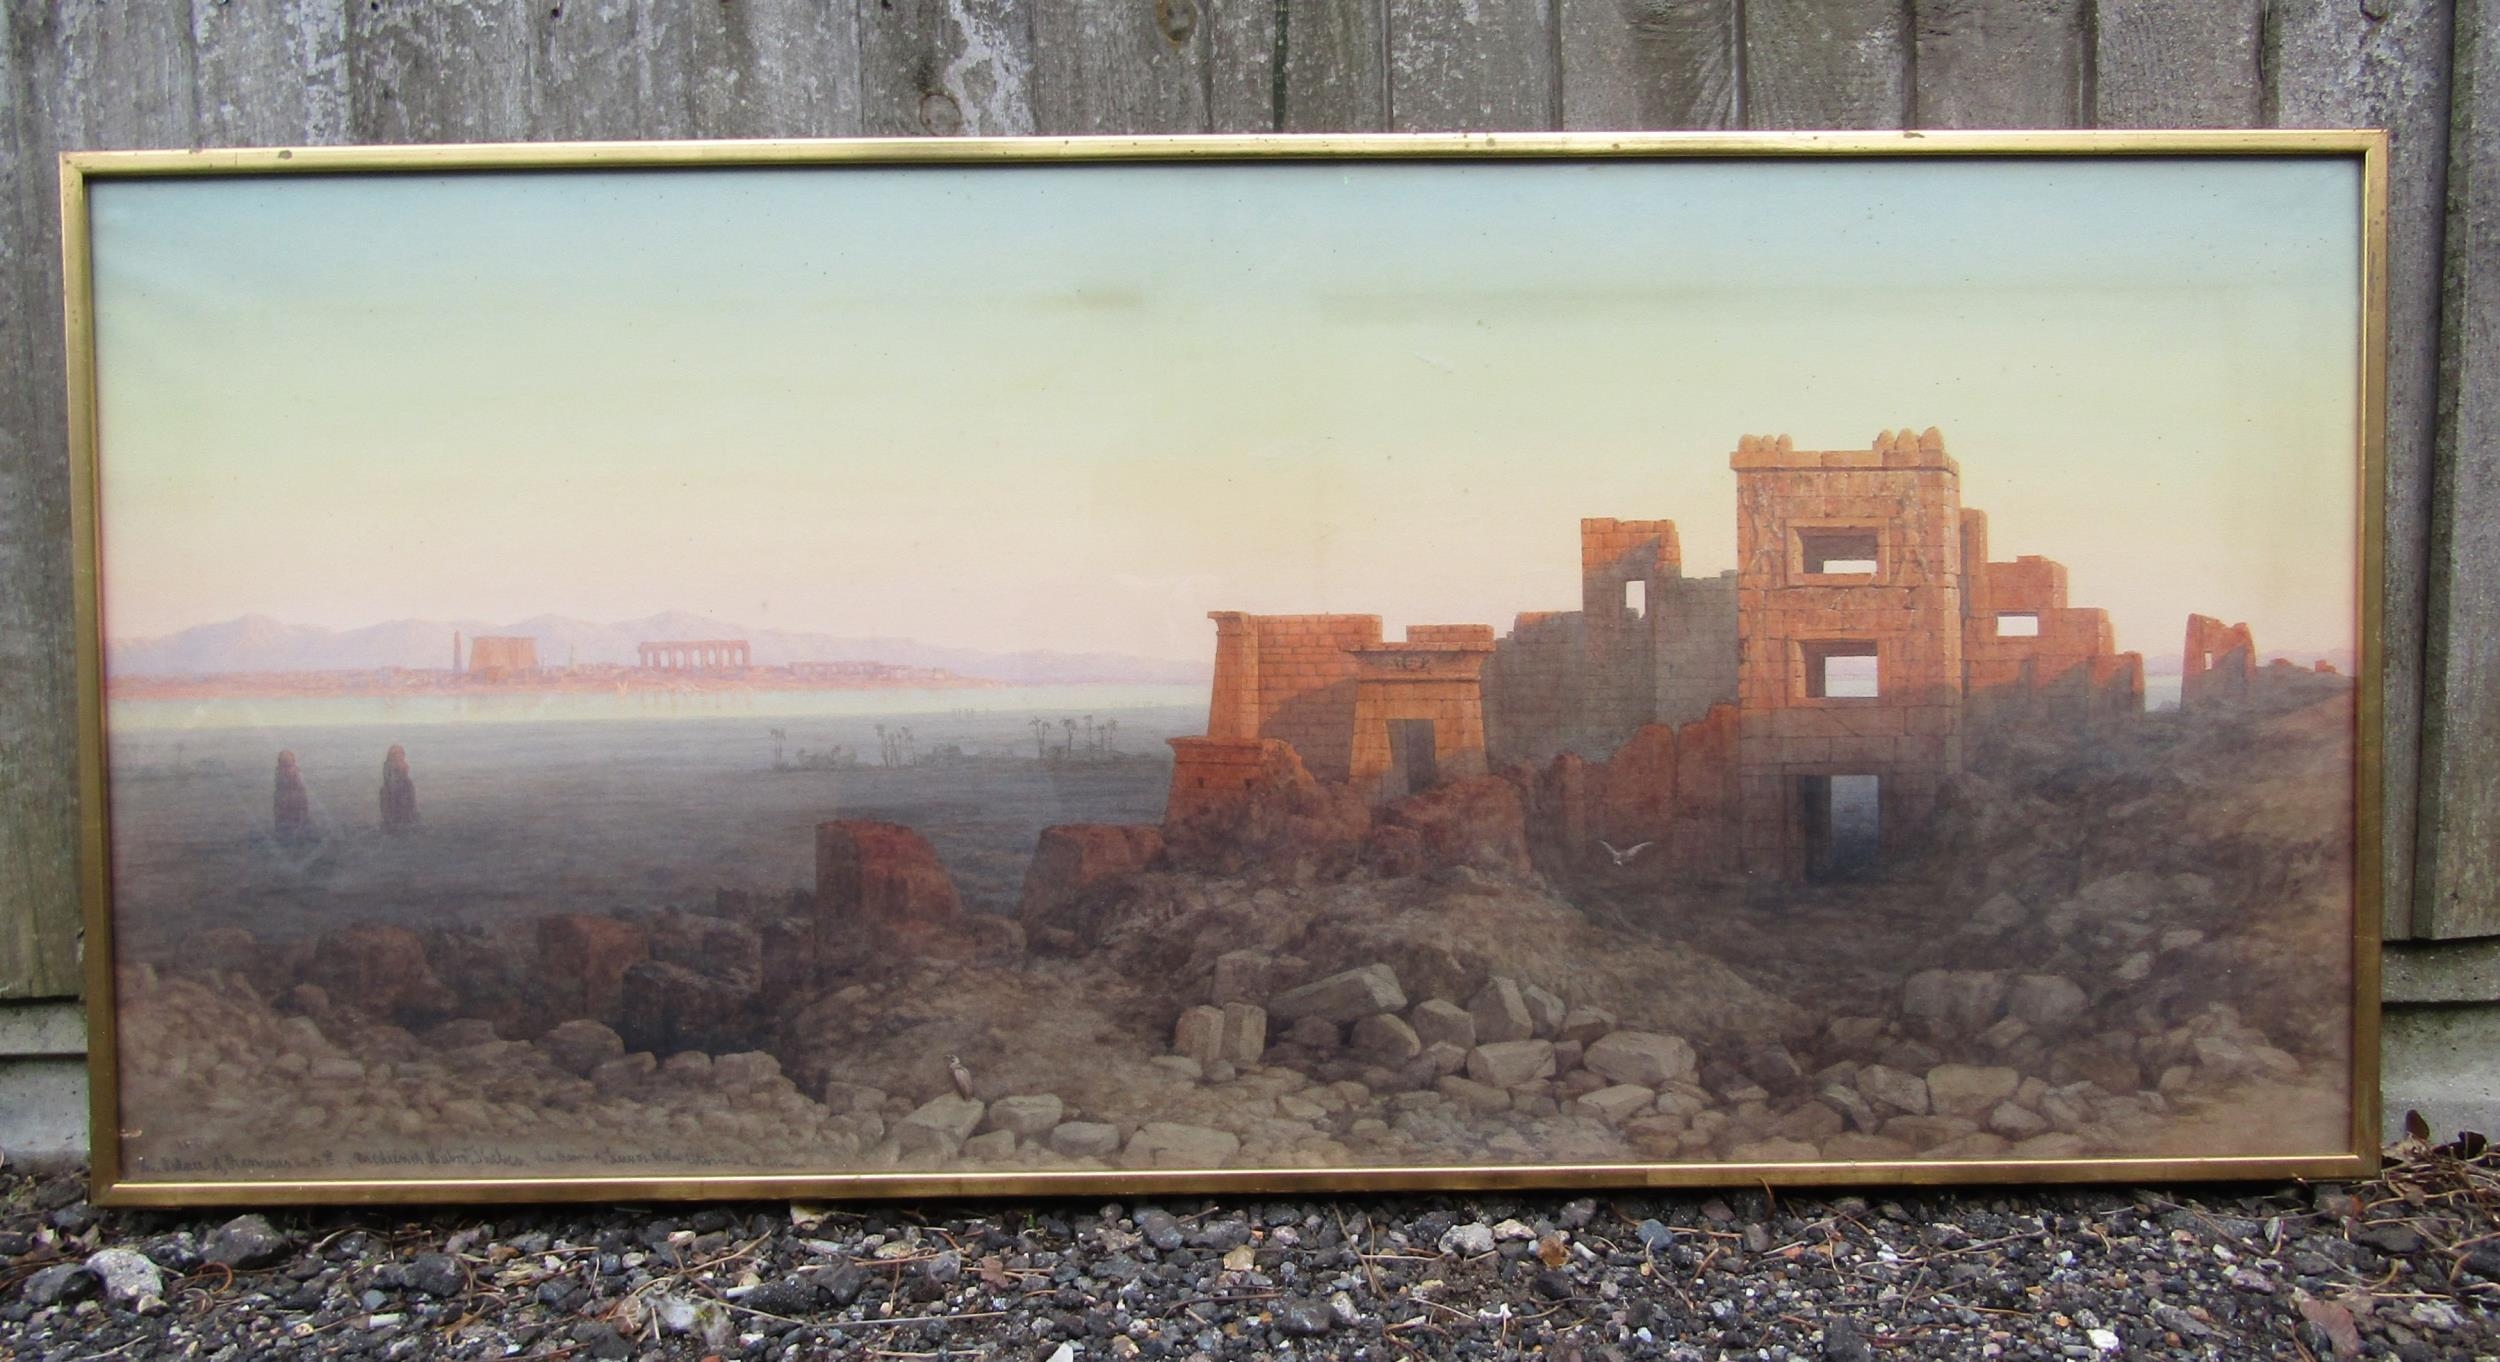 CHARLES VACHER (1818-1883): A late 19th Century landscape depicting Palace of Ramesses III ruins